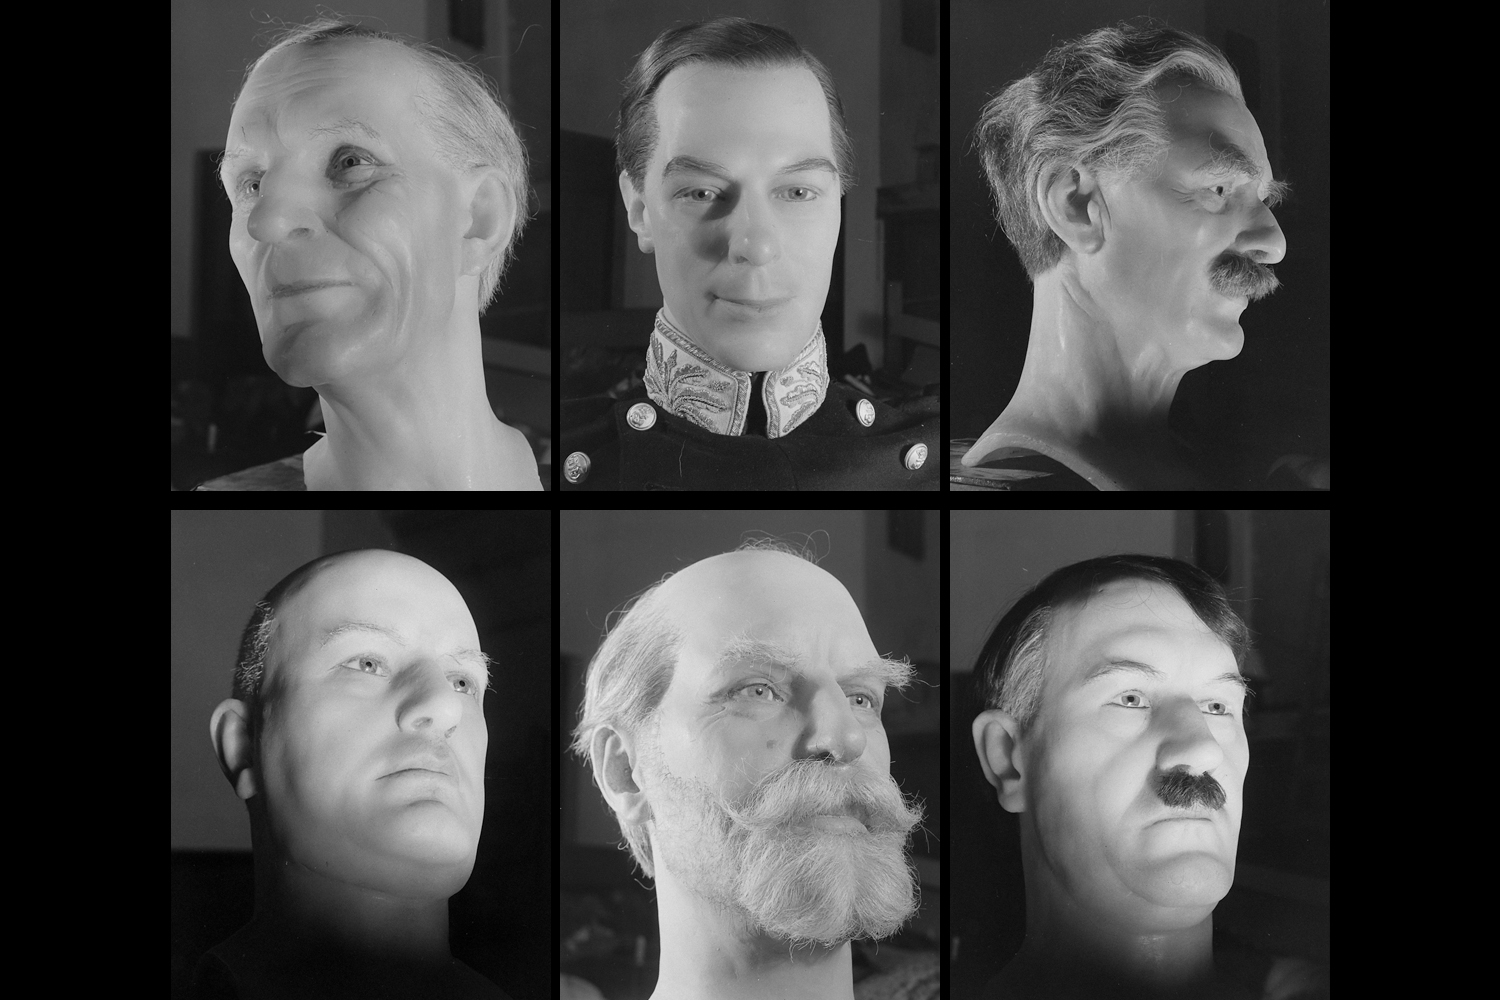 Waxworks on display at the 1939 World's Fair, including Supreme Court Chief Justice Charles Evans Hughes (bottom middle) and Adolf Hitler.